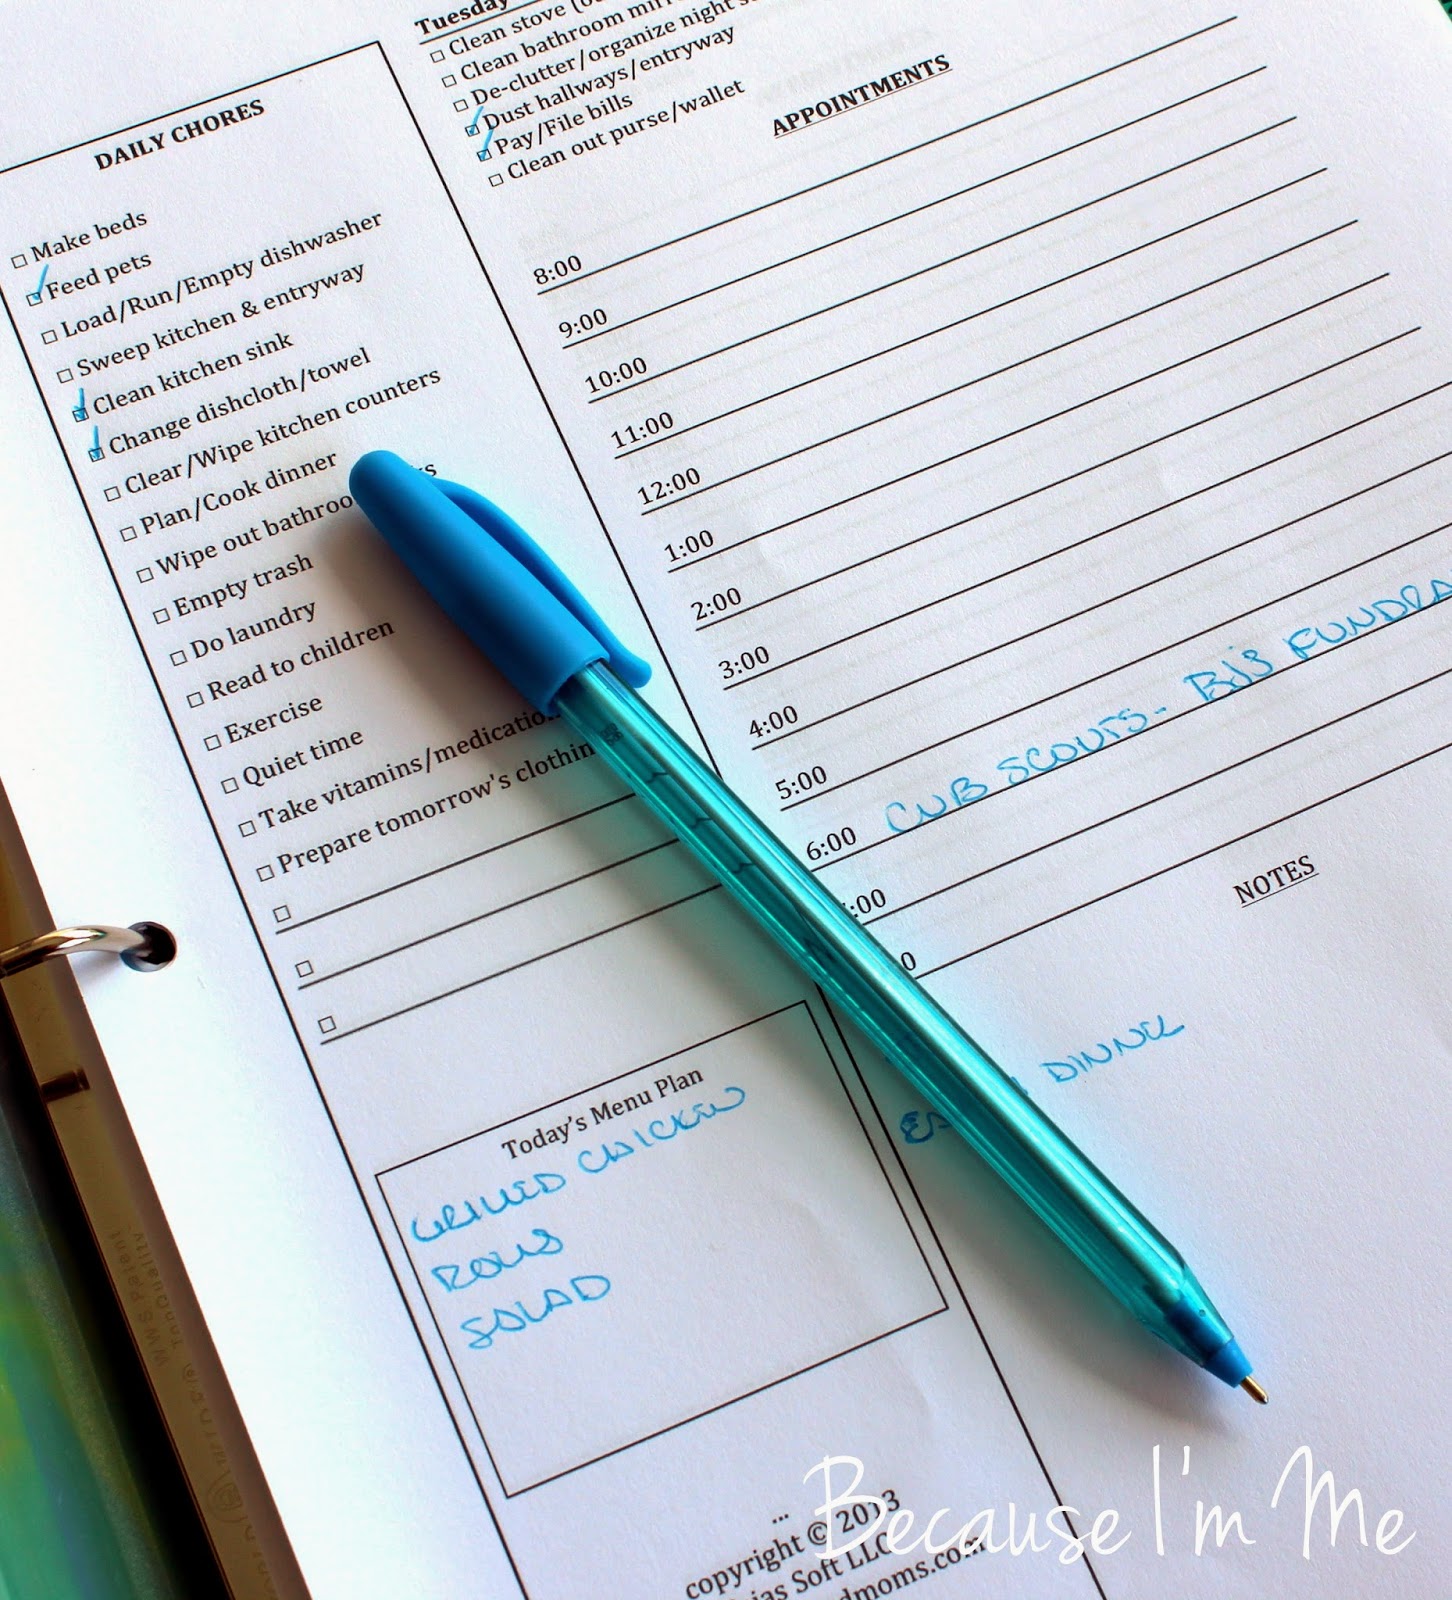 Because I'm Me reviews Motivated Moms daily chore planner - a must for staying organized and on top of the housework